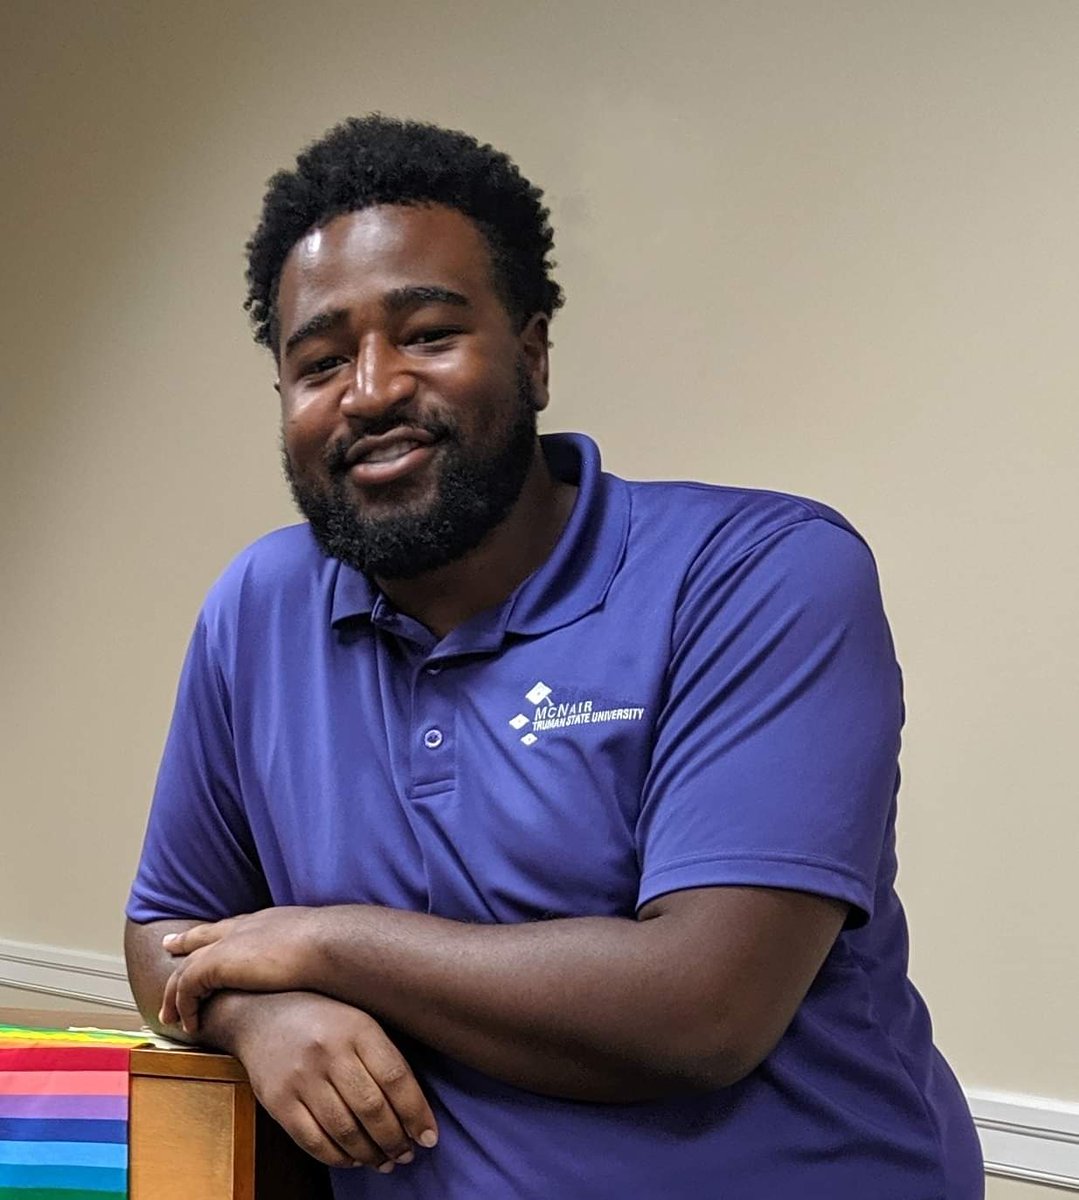 Another acceptance!  🎉🎉🎉  Ray Stewart has been accepted into the Master of Arts in Education & Human Development in Higher Education Administration program at The George Washington University! #mcnair #trumanstate #georgewashingtonu #trioworks #iammcnair #weshowup #highered